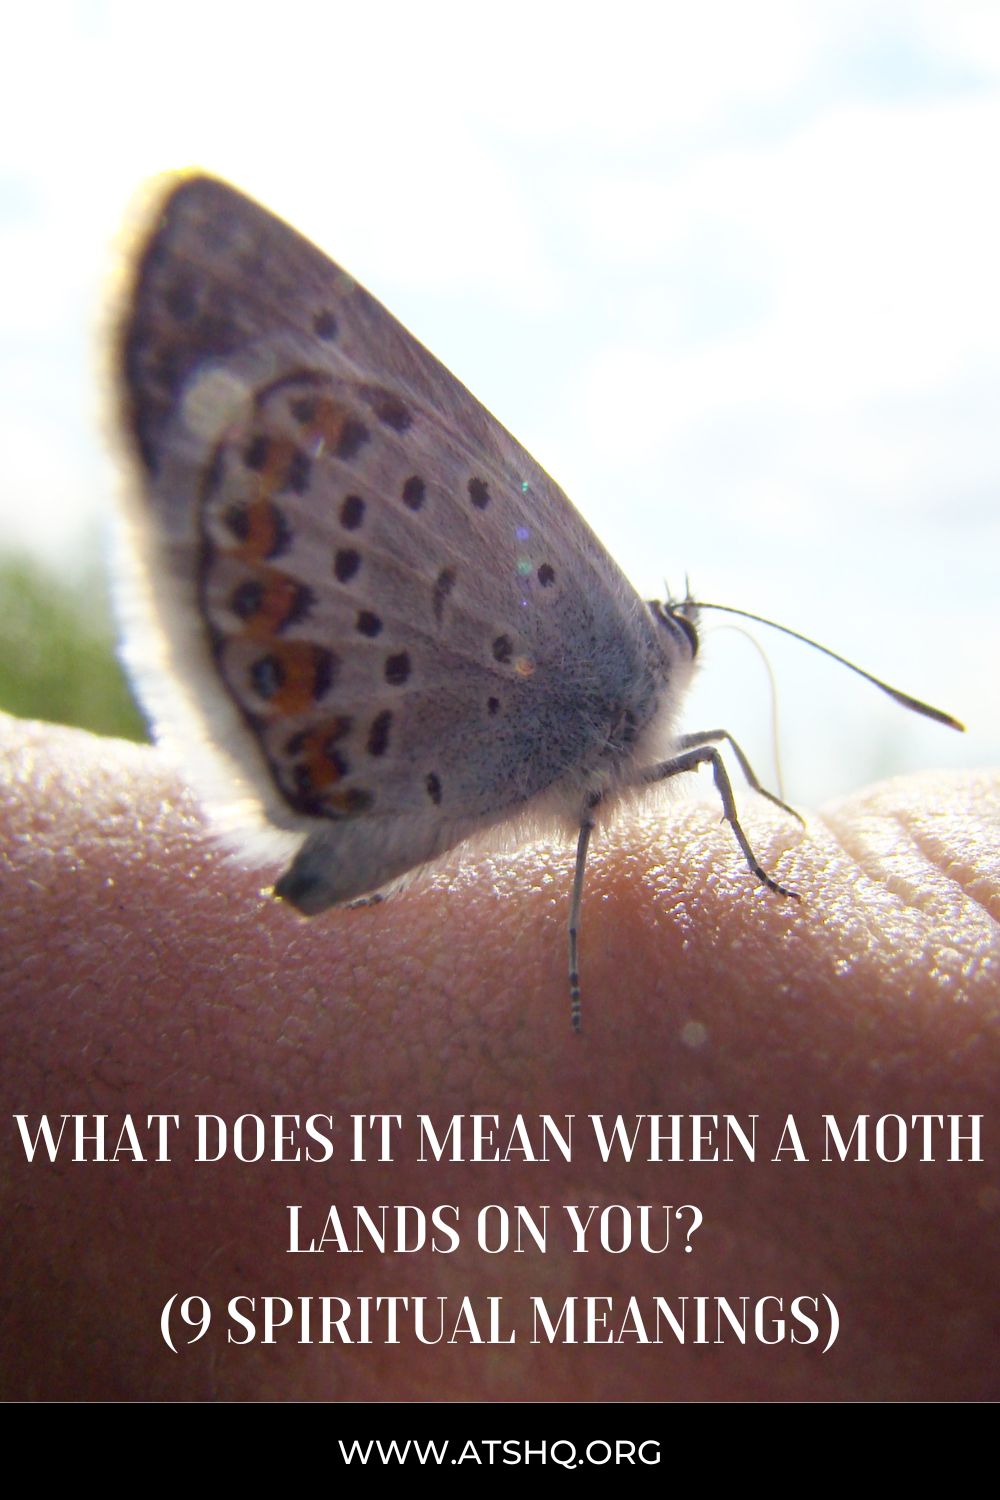 What Does It Mean When a Moth Lands On You